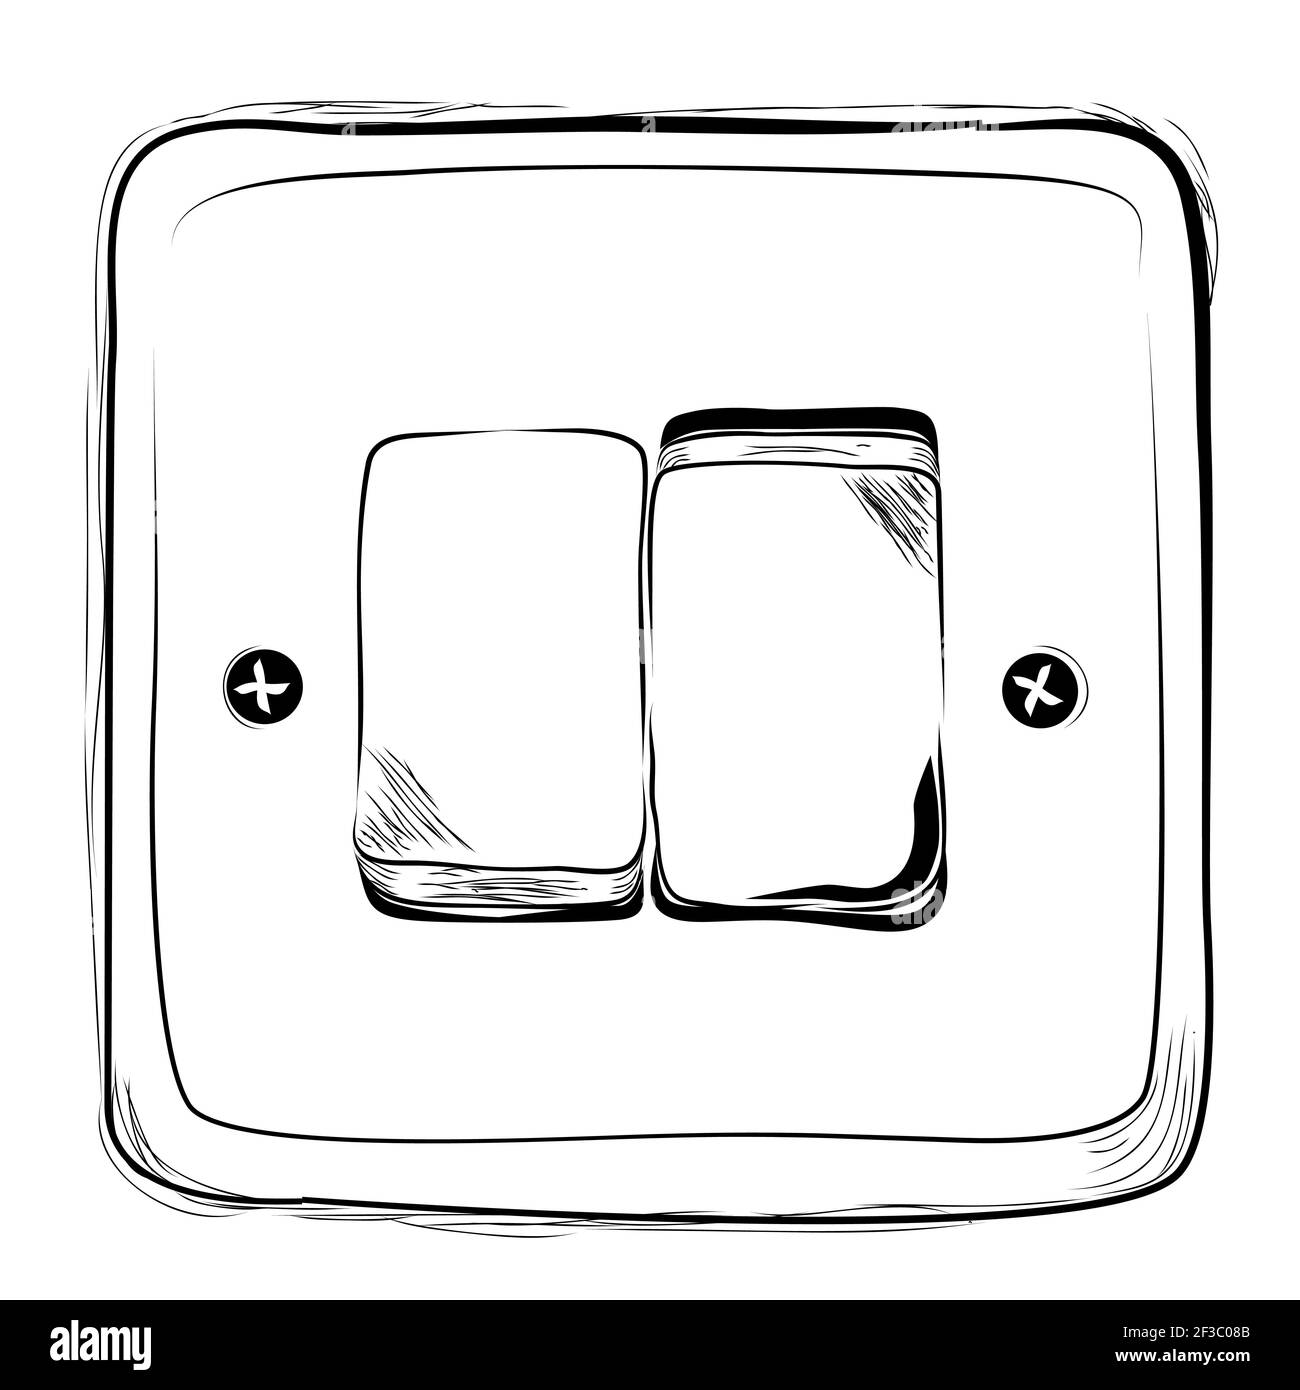 340 Drawing Of A On Off Switch Illustrations RoyaltyFree Vector Graphics   Clip Art  iStock